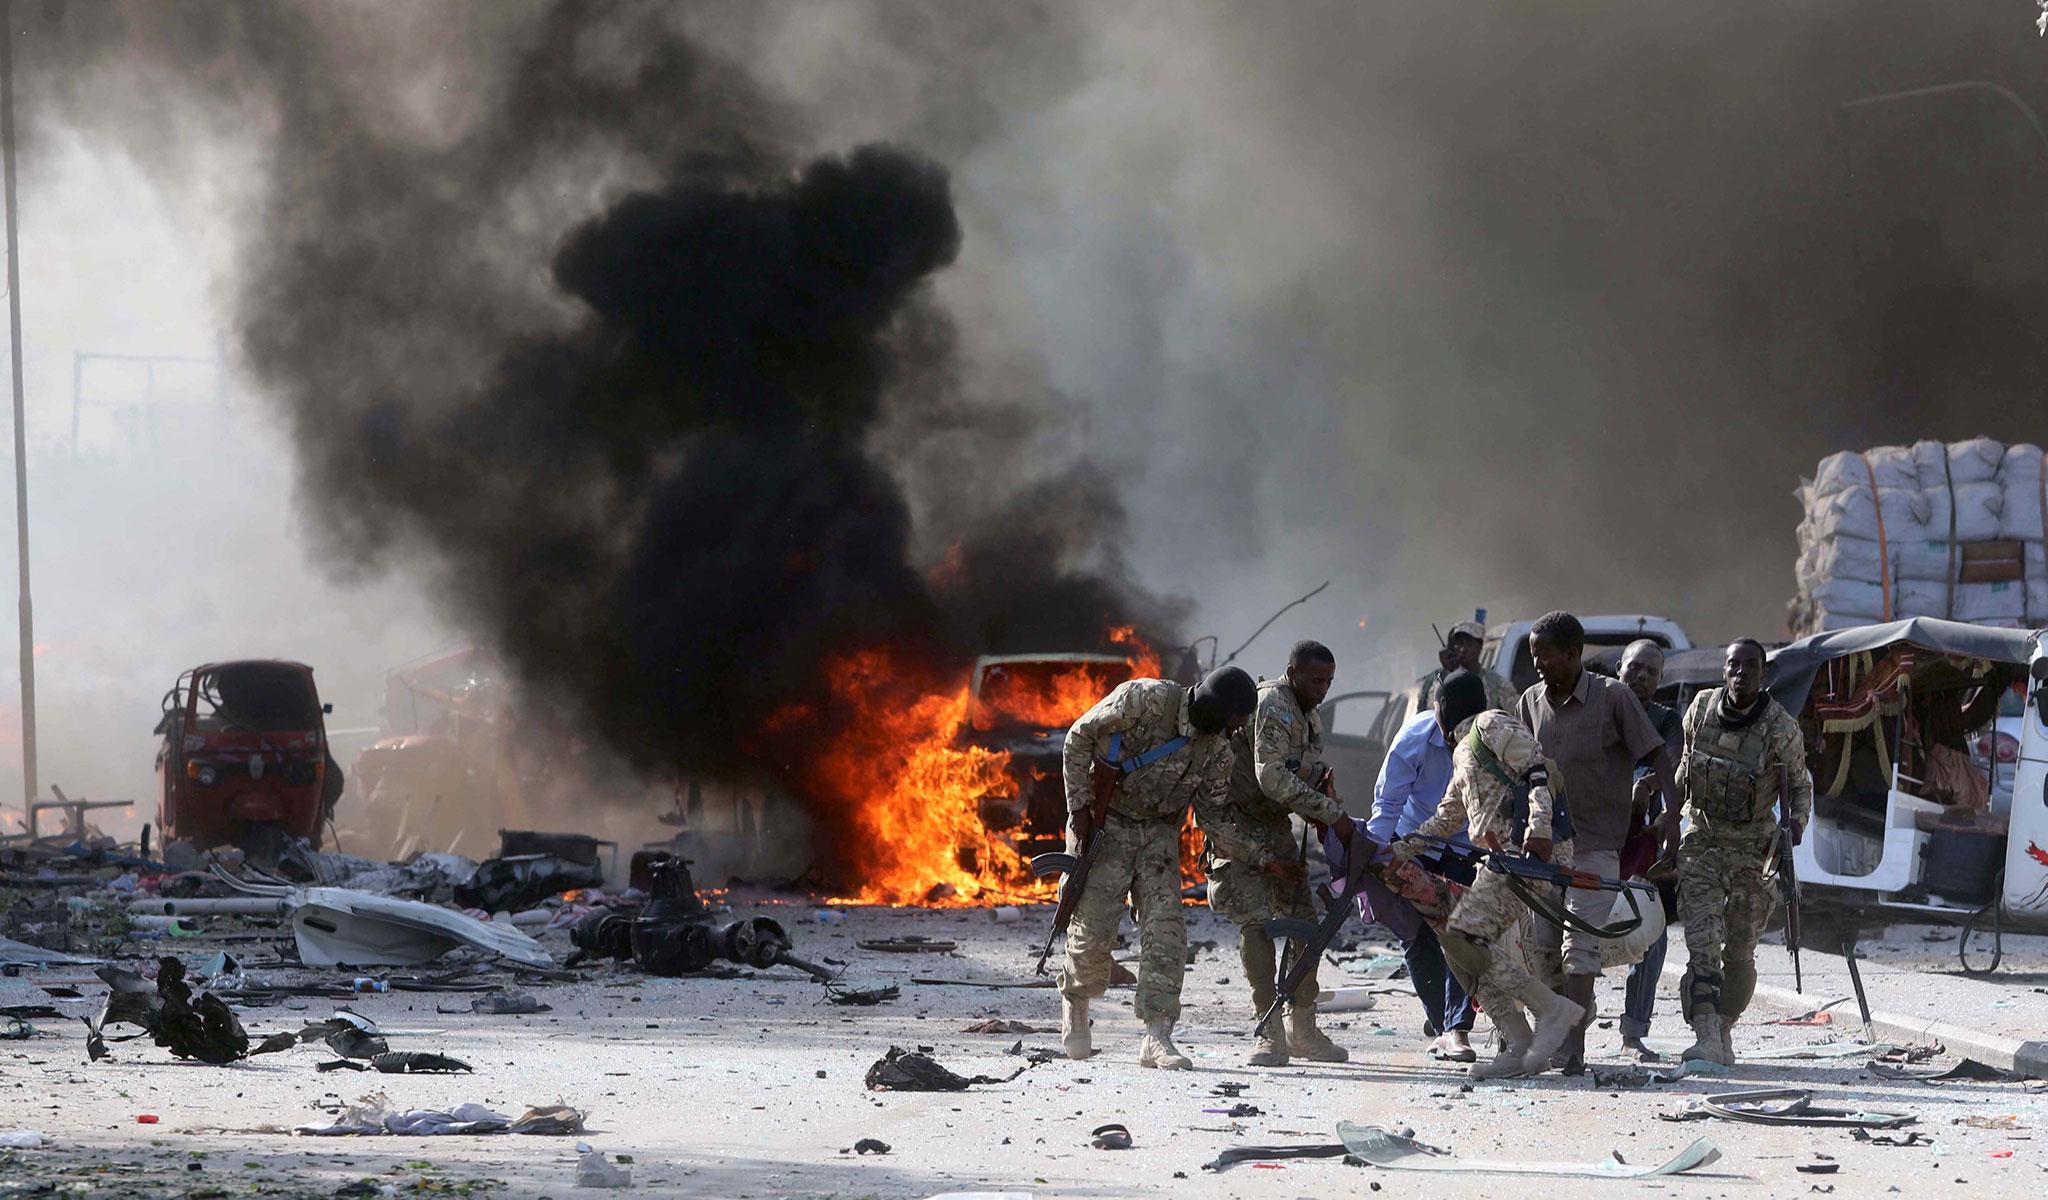 Somali Armed Forces evacuate their injured colleague, from the scene of an explosion in KM4 street in the Hodan district of Mogadishu, Somalia